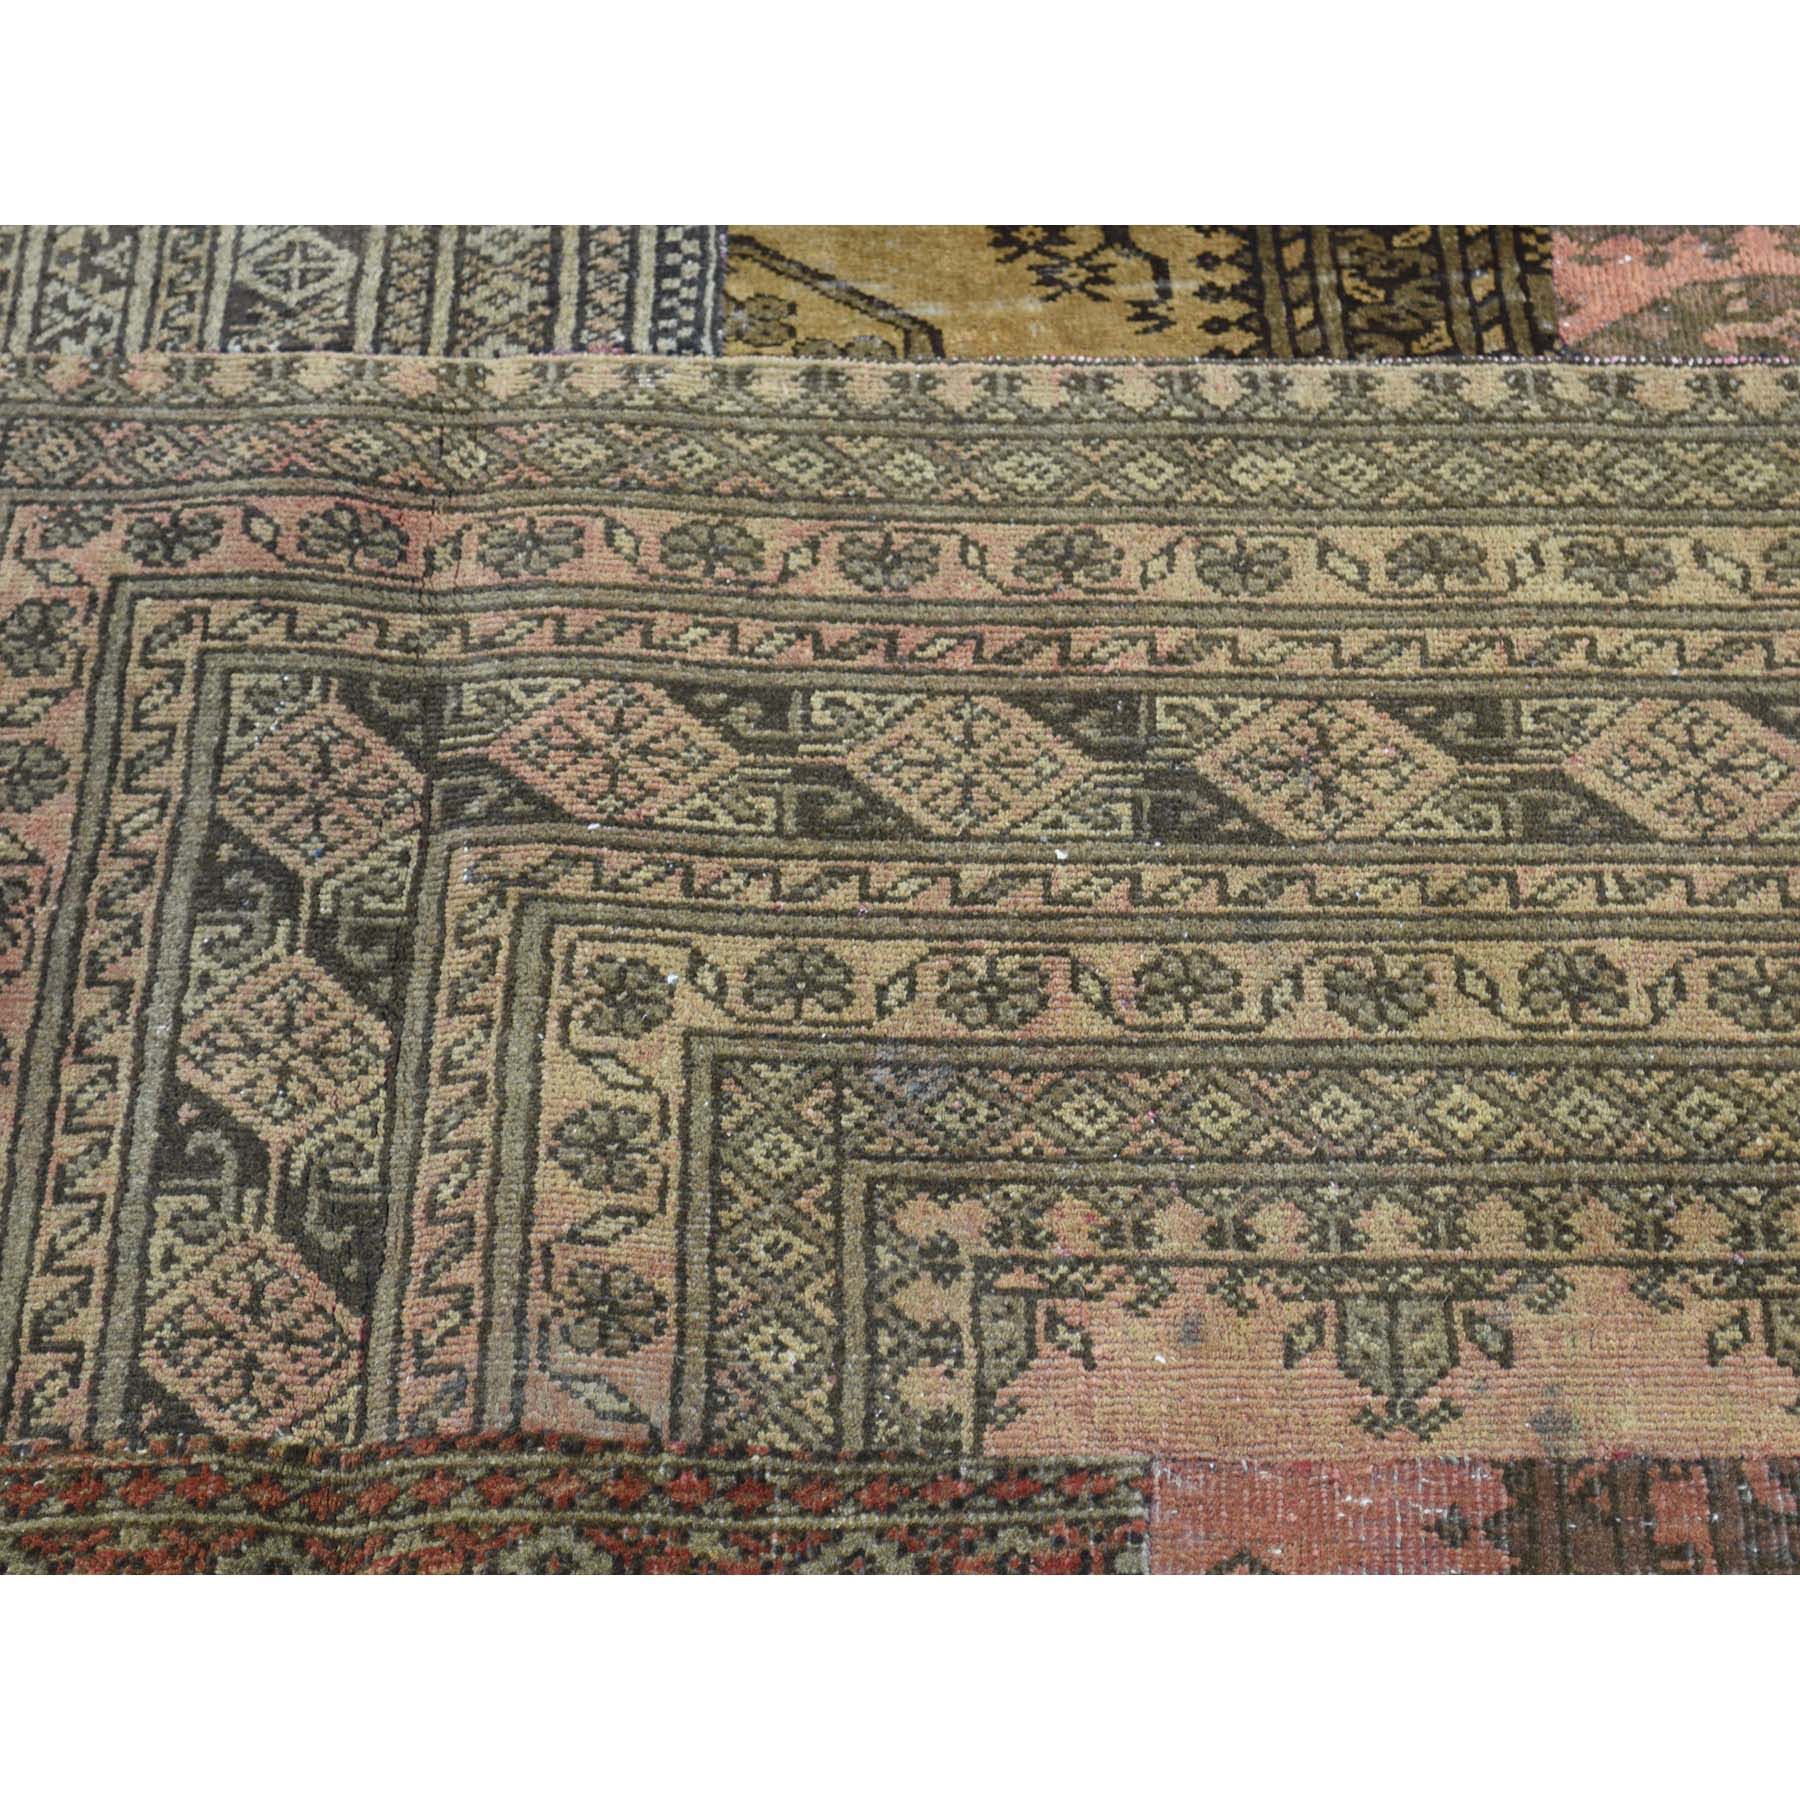 9-x12- Pure Wool Persian Overdyed Afghan Patchwork Hand-Knotted Carpet 